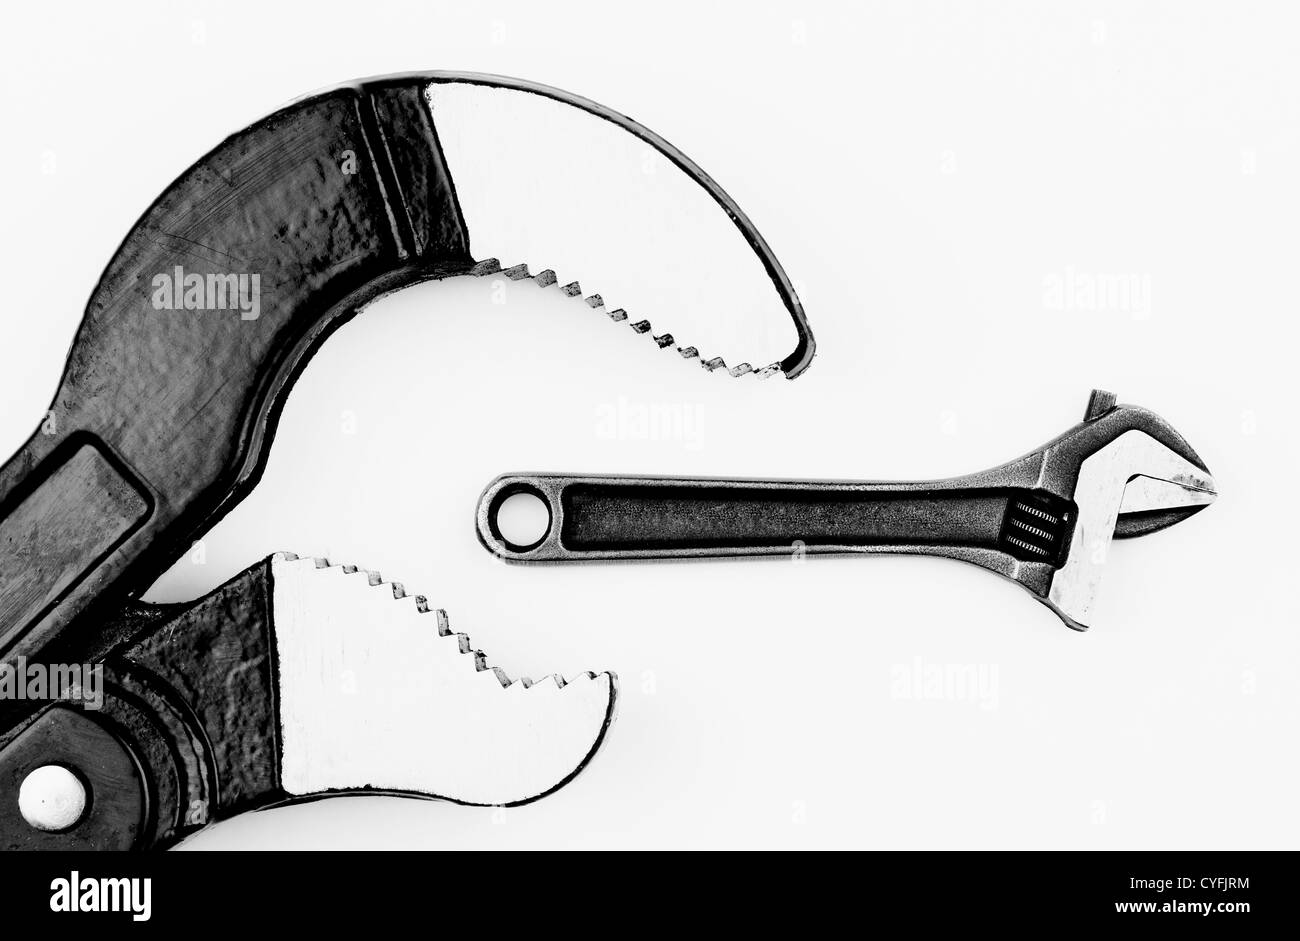 Law of nature, eat or be eaten. Two tools, black and white photo, white background Stock Photo